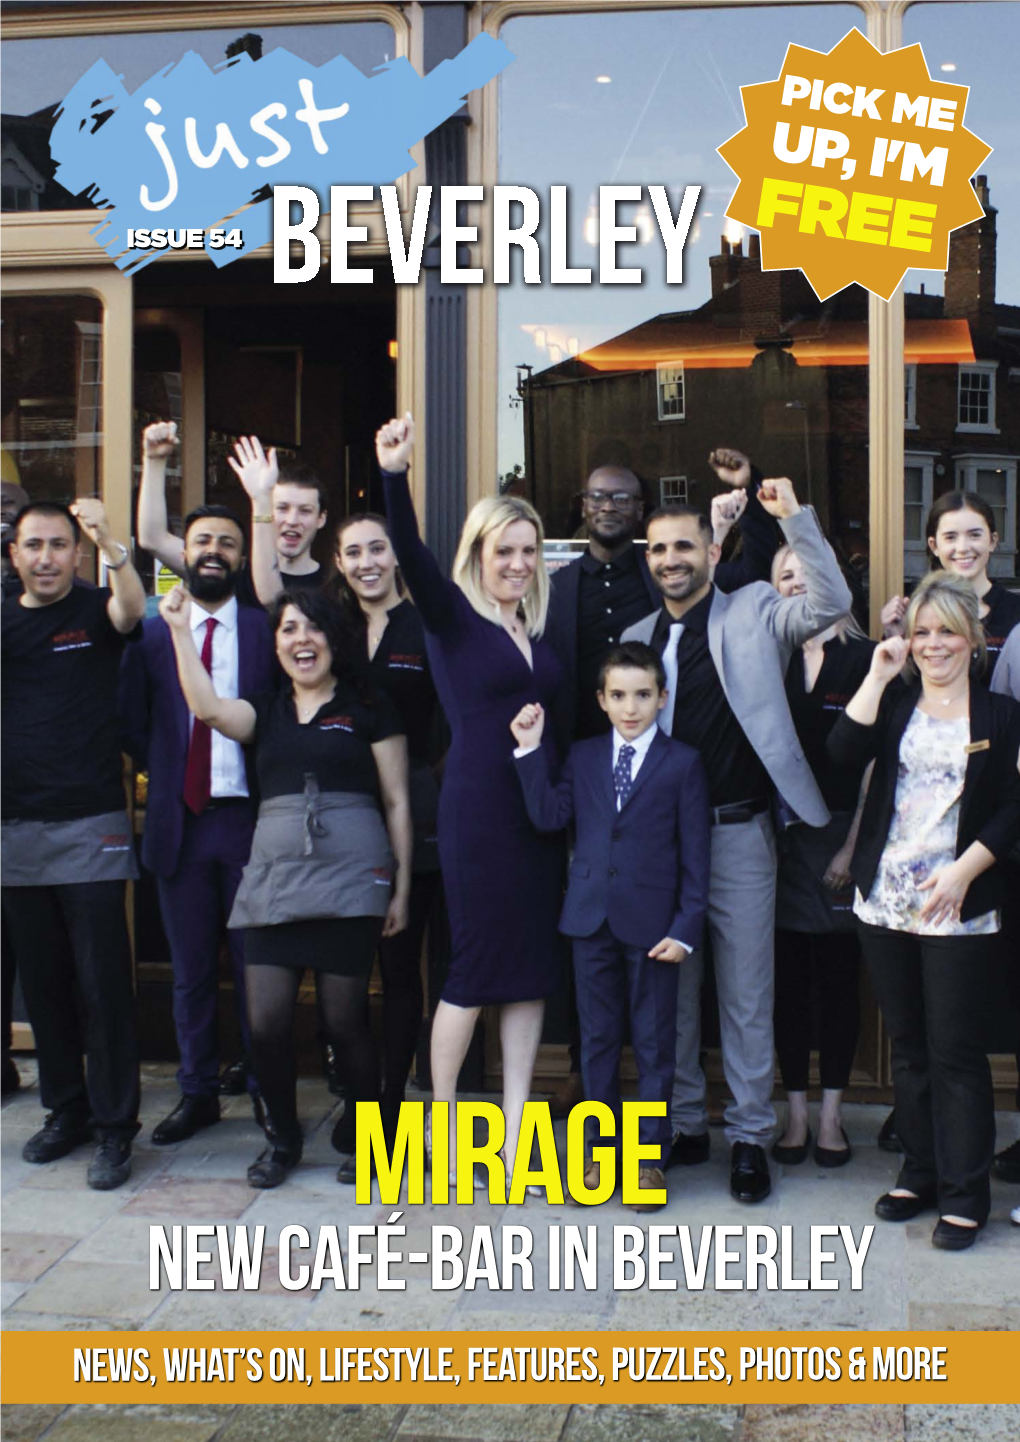 NEW CAFÉ-BAR in BEVERLEY NEWS, WHAT’S ON, LIFESTYLE, FEATURES, PUZZLES, PHOTOS & MORE Your Partners in Payroll Changes in Payroll